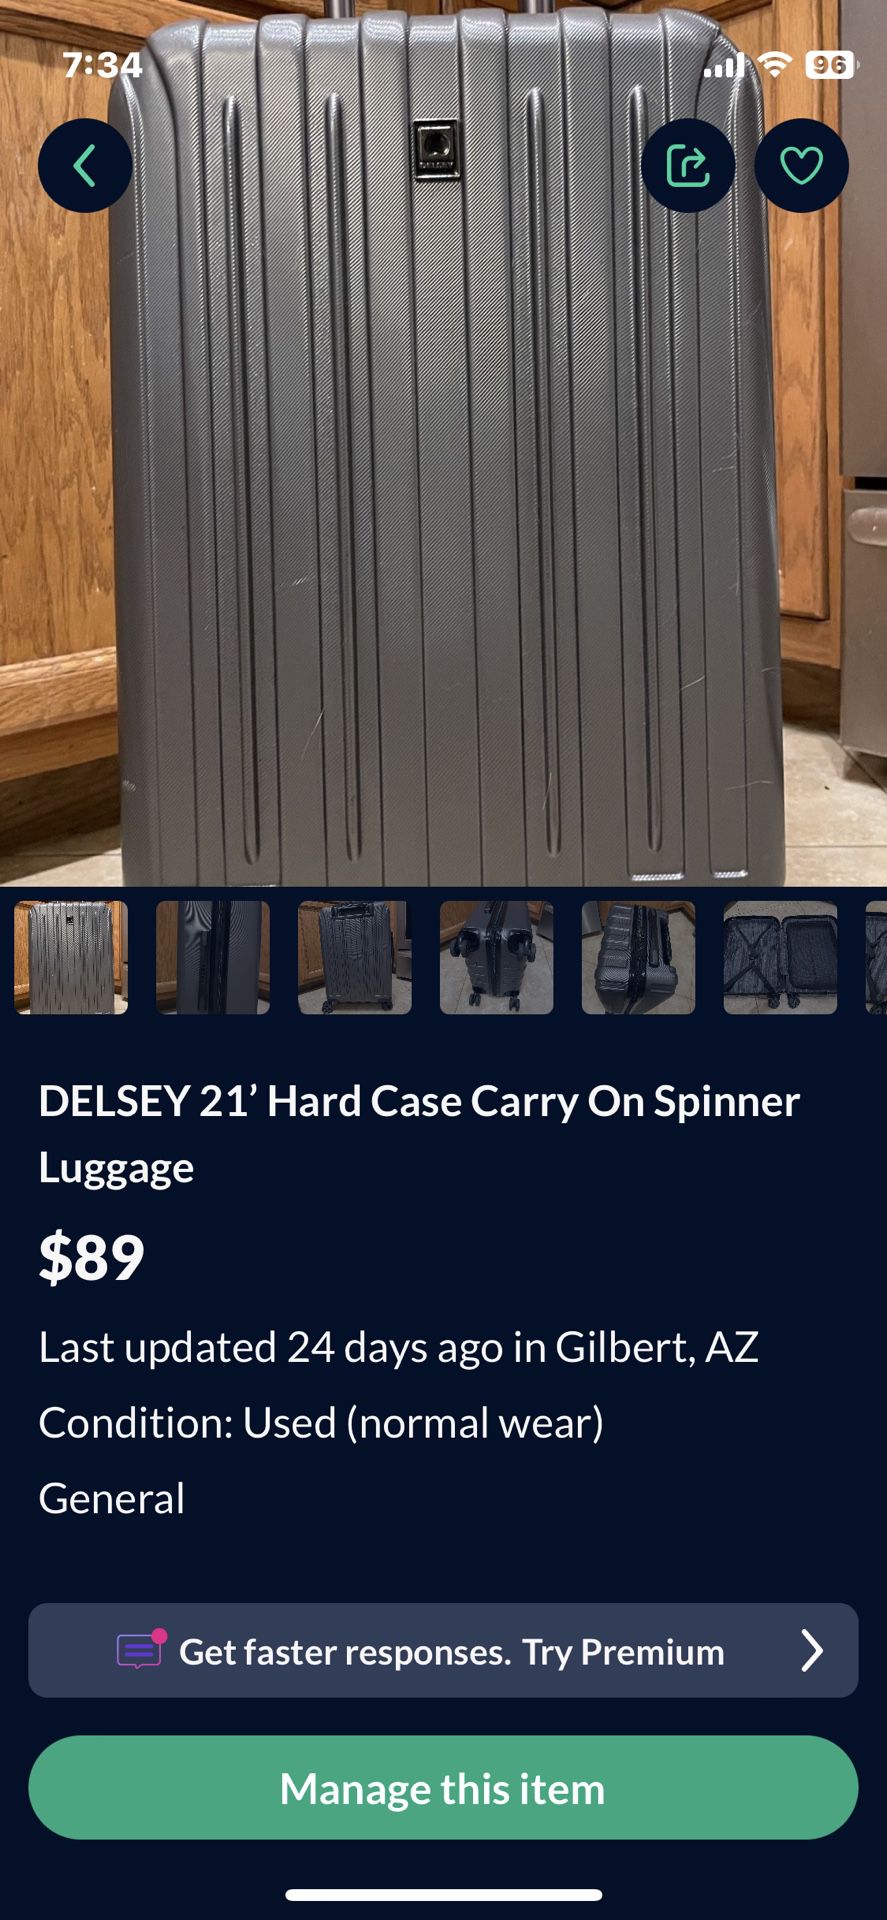 DELSEY 21’ Hard Case Carry On Spinner Luggage